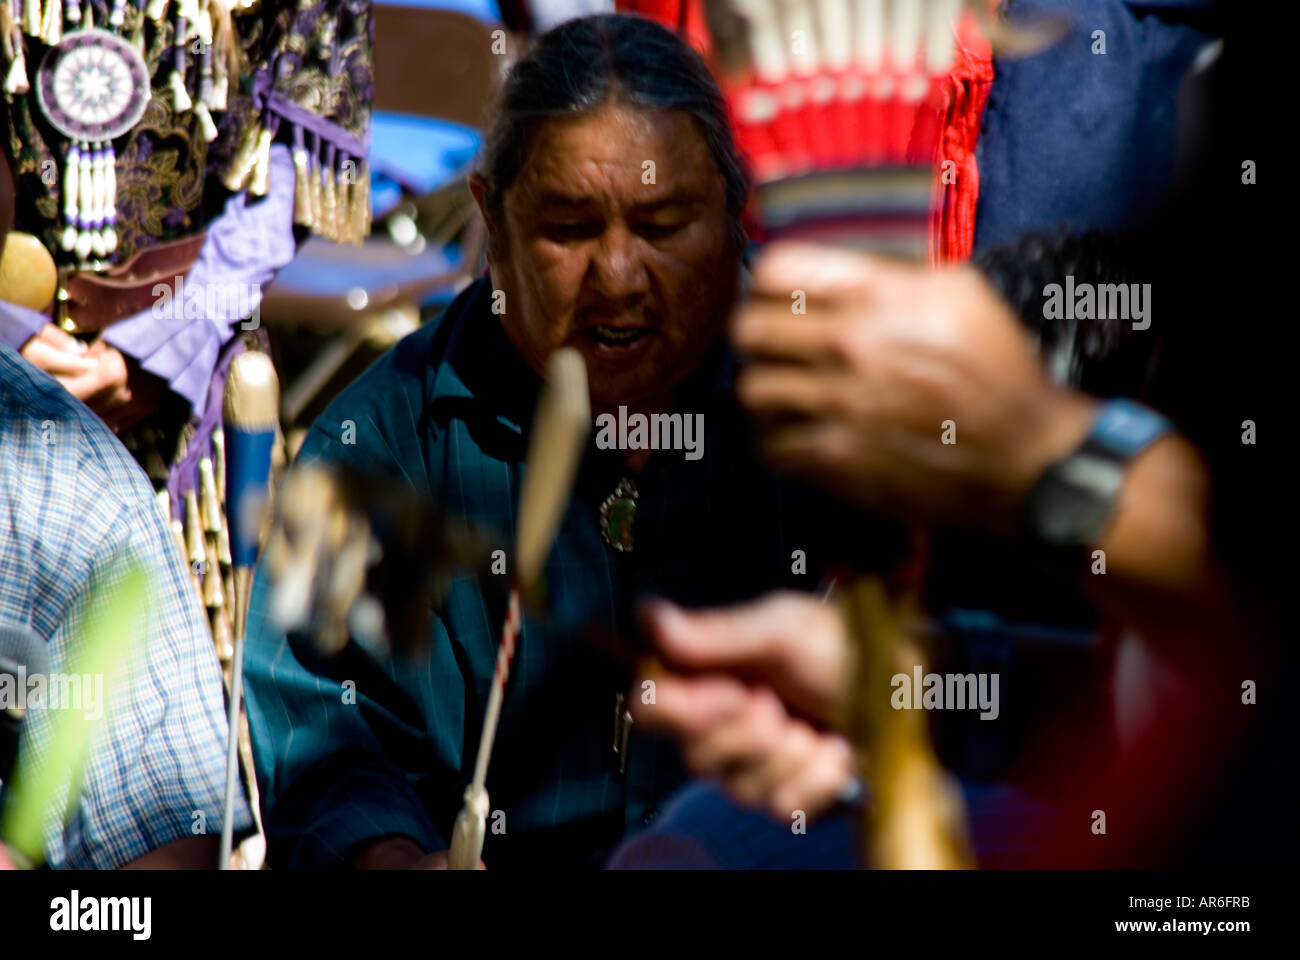 Scenes from the New Mexico State Fair including Native American Pow Wow dance rituals Stock Photo